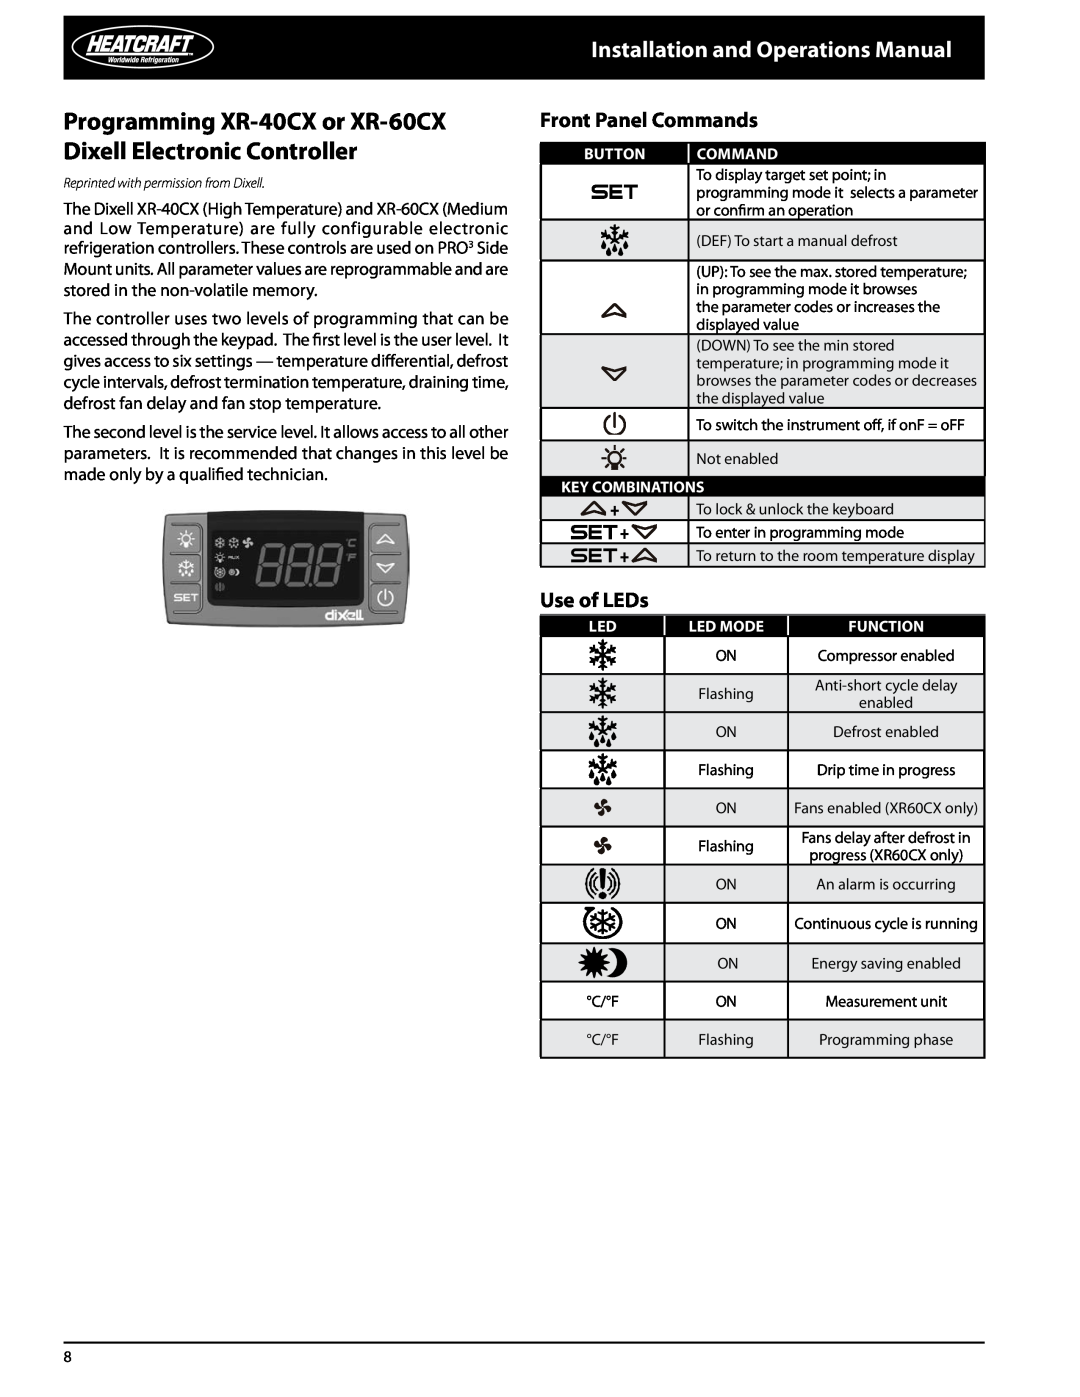 Heatcraft Refrigeration Products PRO3 Front Panel Commands, Use of LEDs, Installation and Operations Manual, Led Mode 